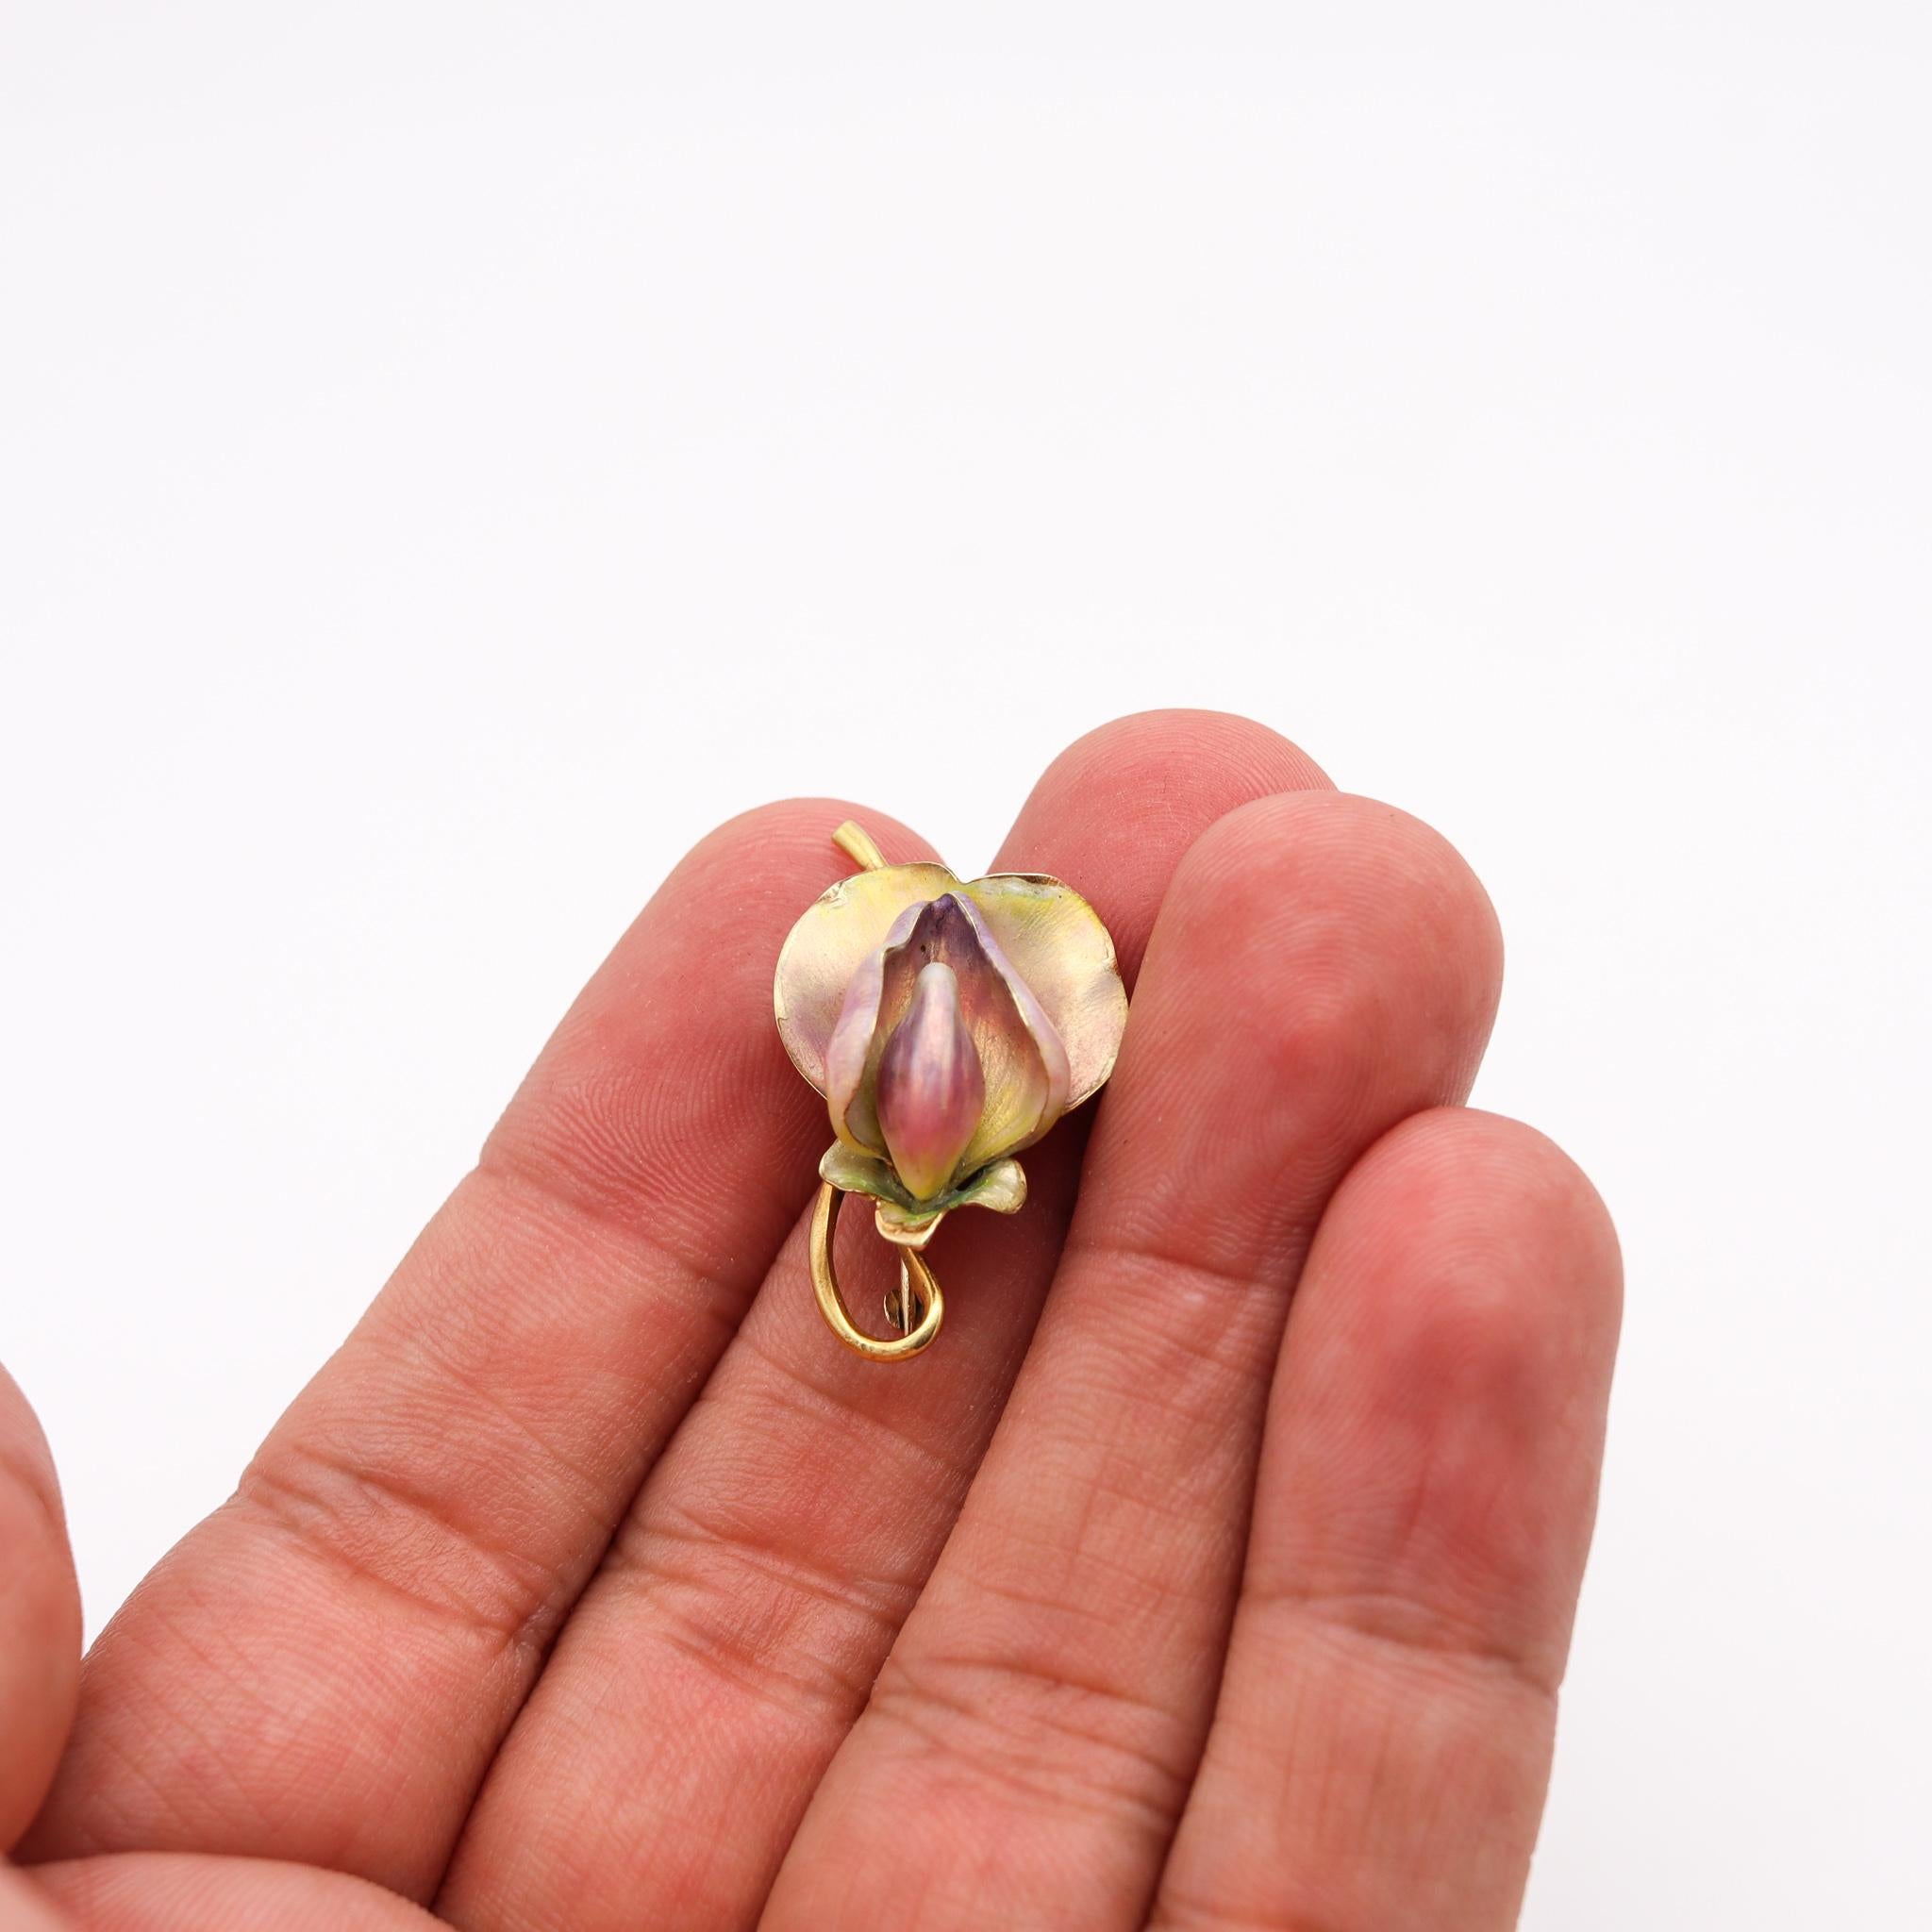 Art Nouveau 1900 Edwardian Enamel Orchid Flower Brooch In 18Kt Yellow Gold In Excellent Condition For Sale In Miami, FL